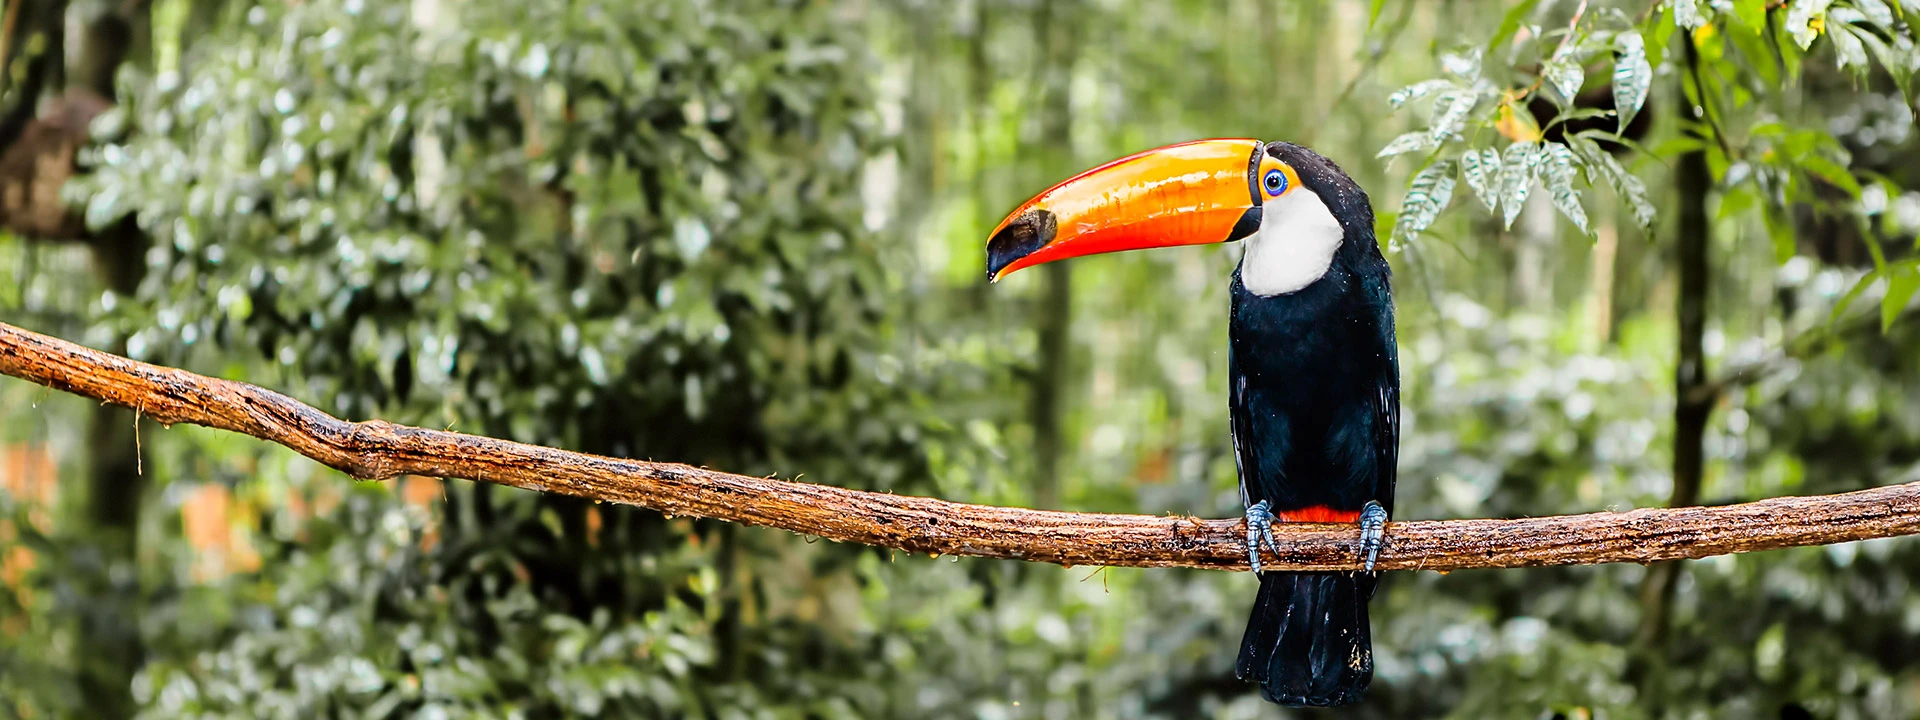 toco toucan in the South America jungles